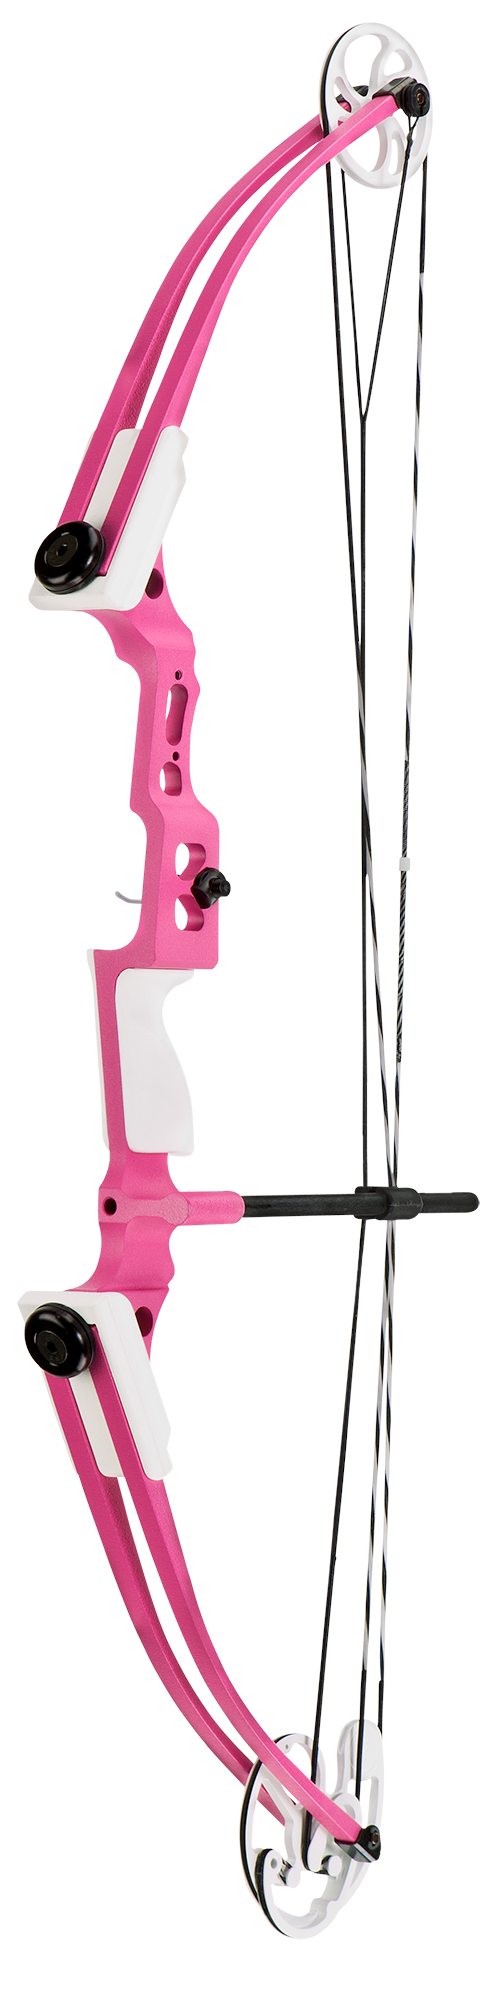 Genesis Mini Compound Bow Packages for Youth